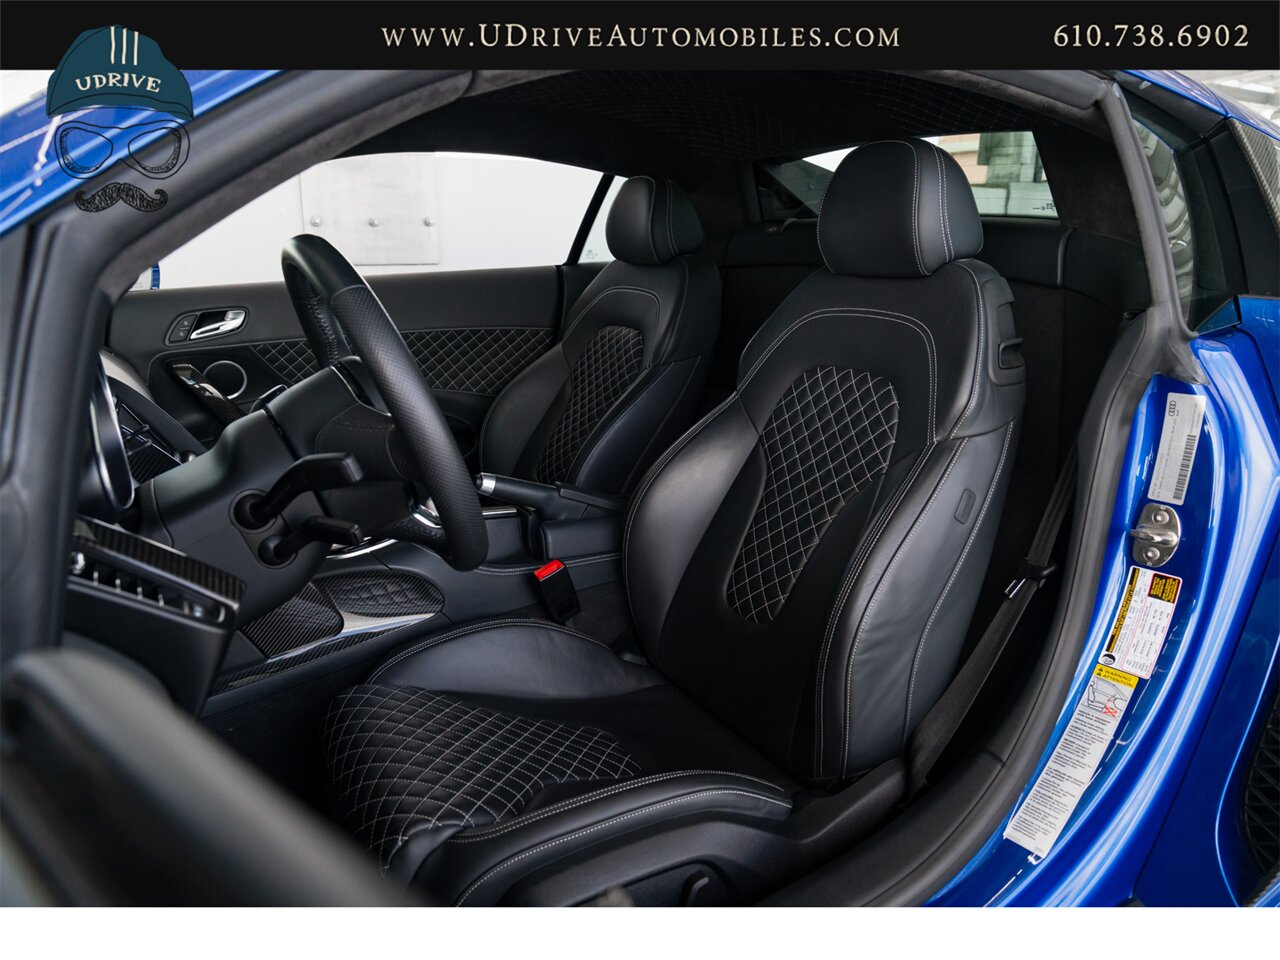 2015 Audi R8 5.2 V10 Quattro 6 Speed Manual 10k Miles  Diamond Stitched Leather 1 of 2 - Photo 30 - West Chester, PA 19382